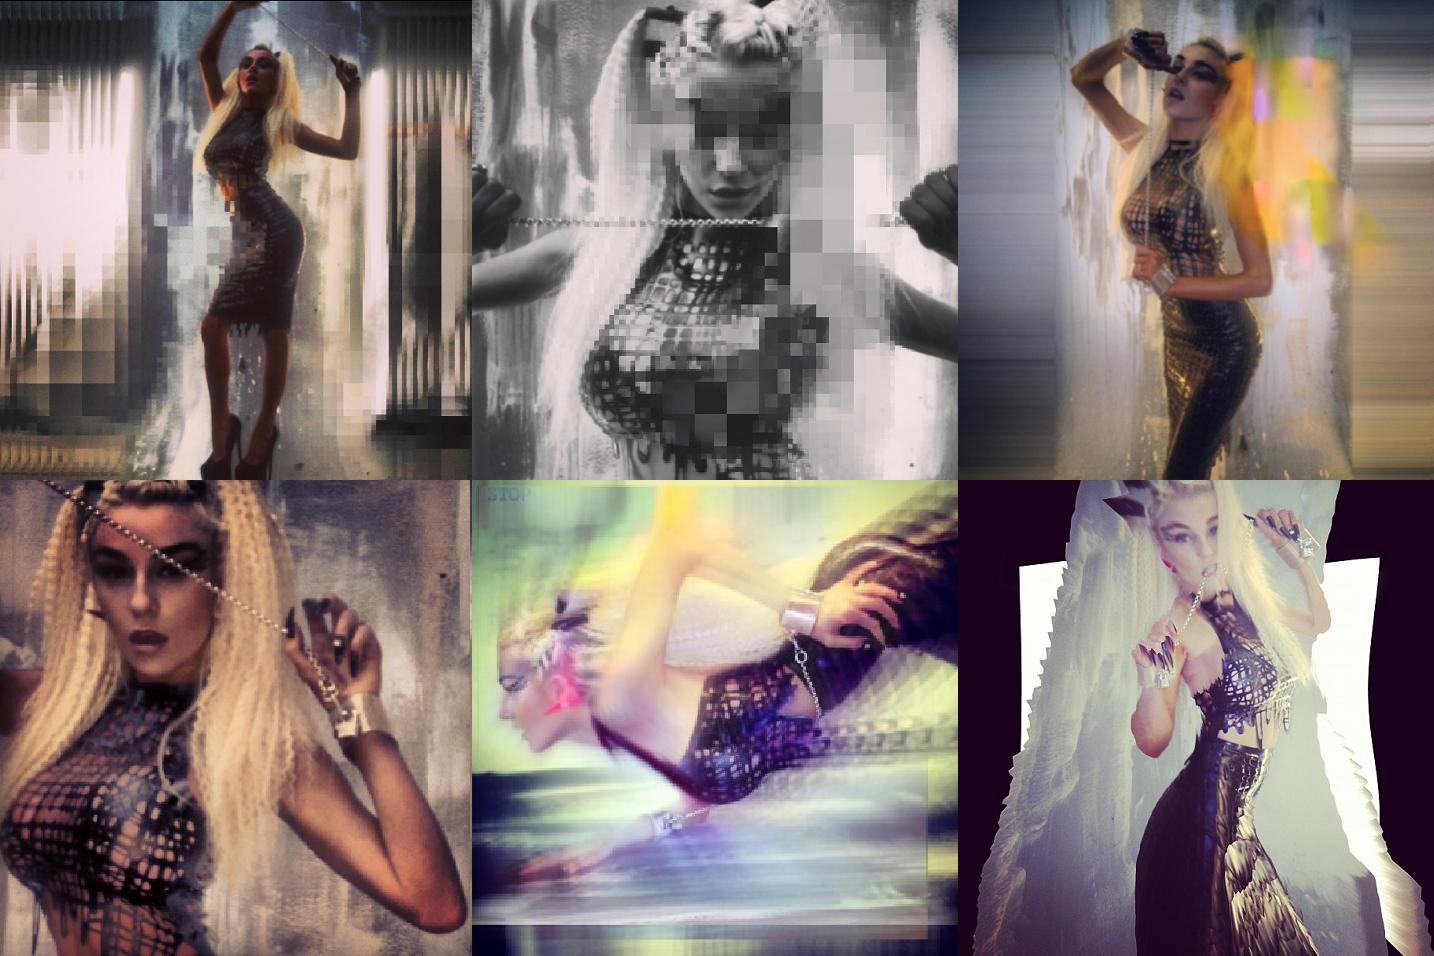 Courtney Stodden for #powershift By Nick Knight